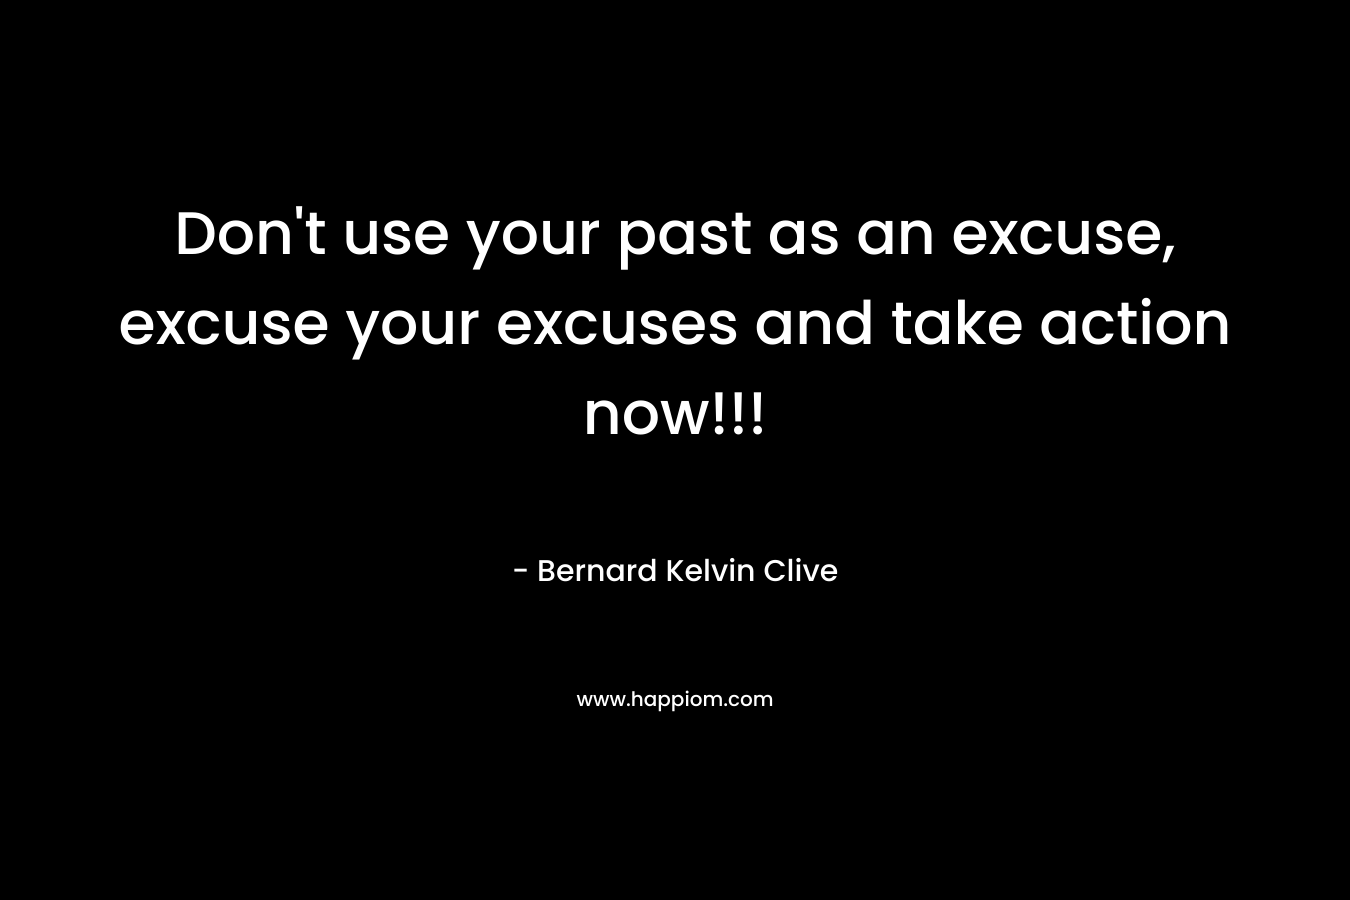 Don't use your past as an excuse, excuse your excuses and take action now!!!